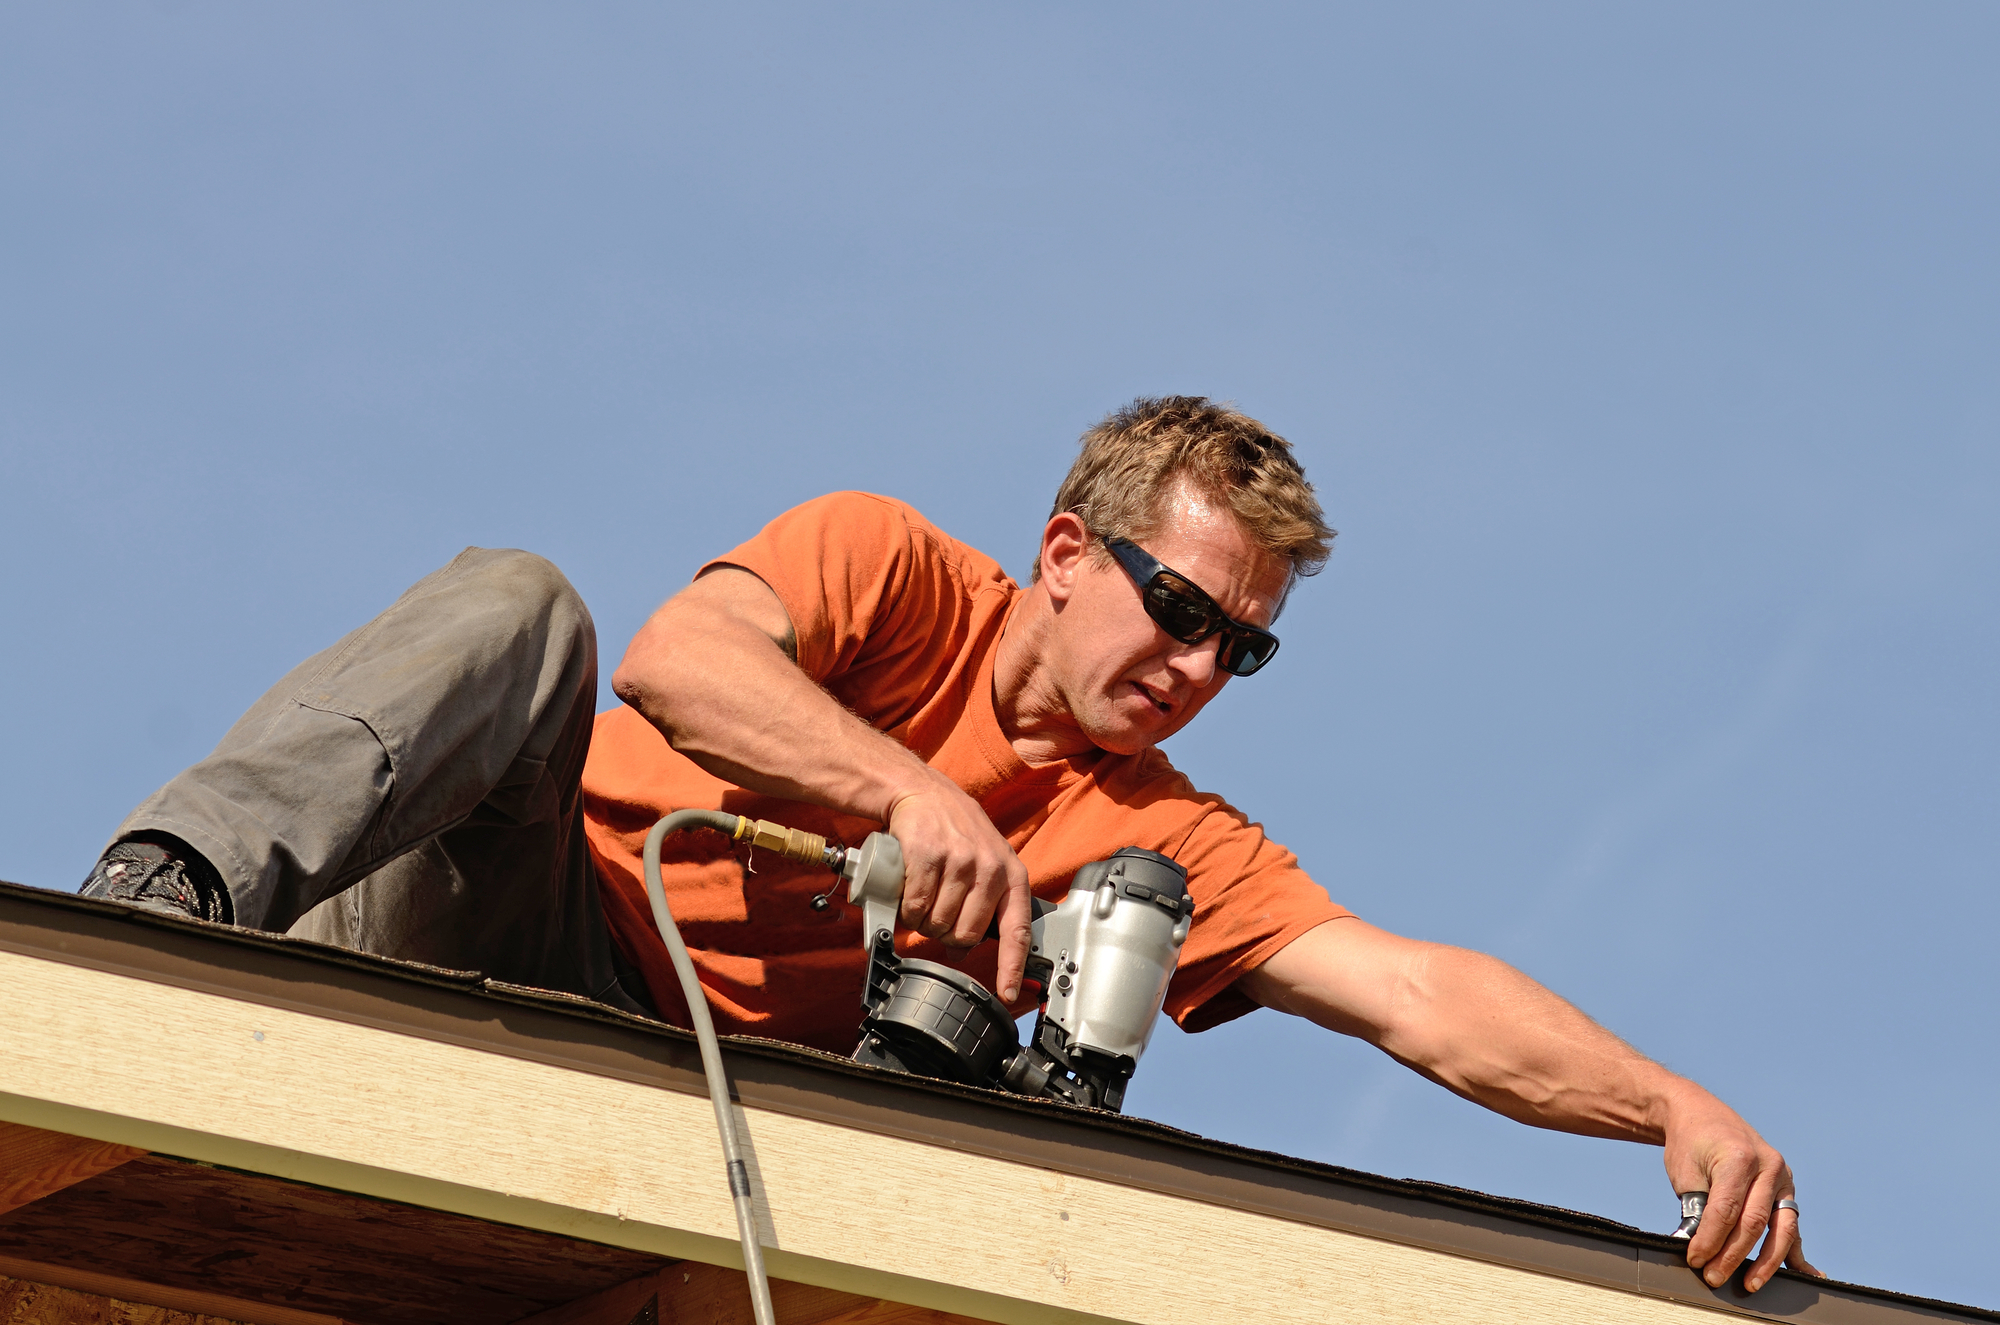 man with sunglasses uses nail gun to attach roofing